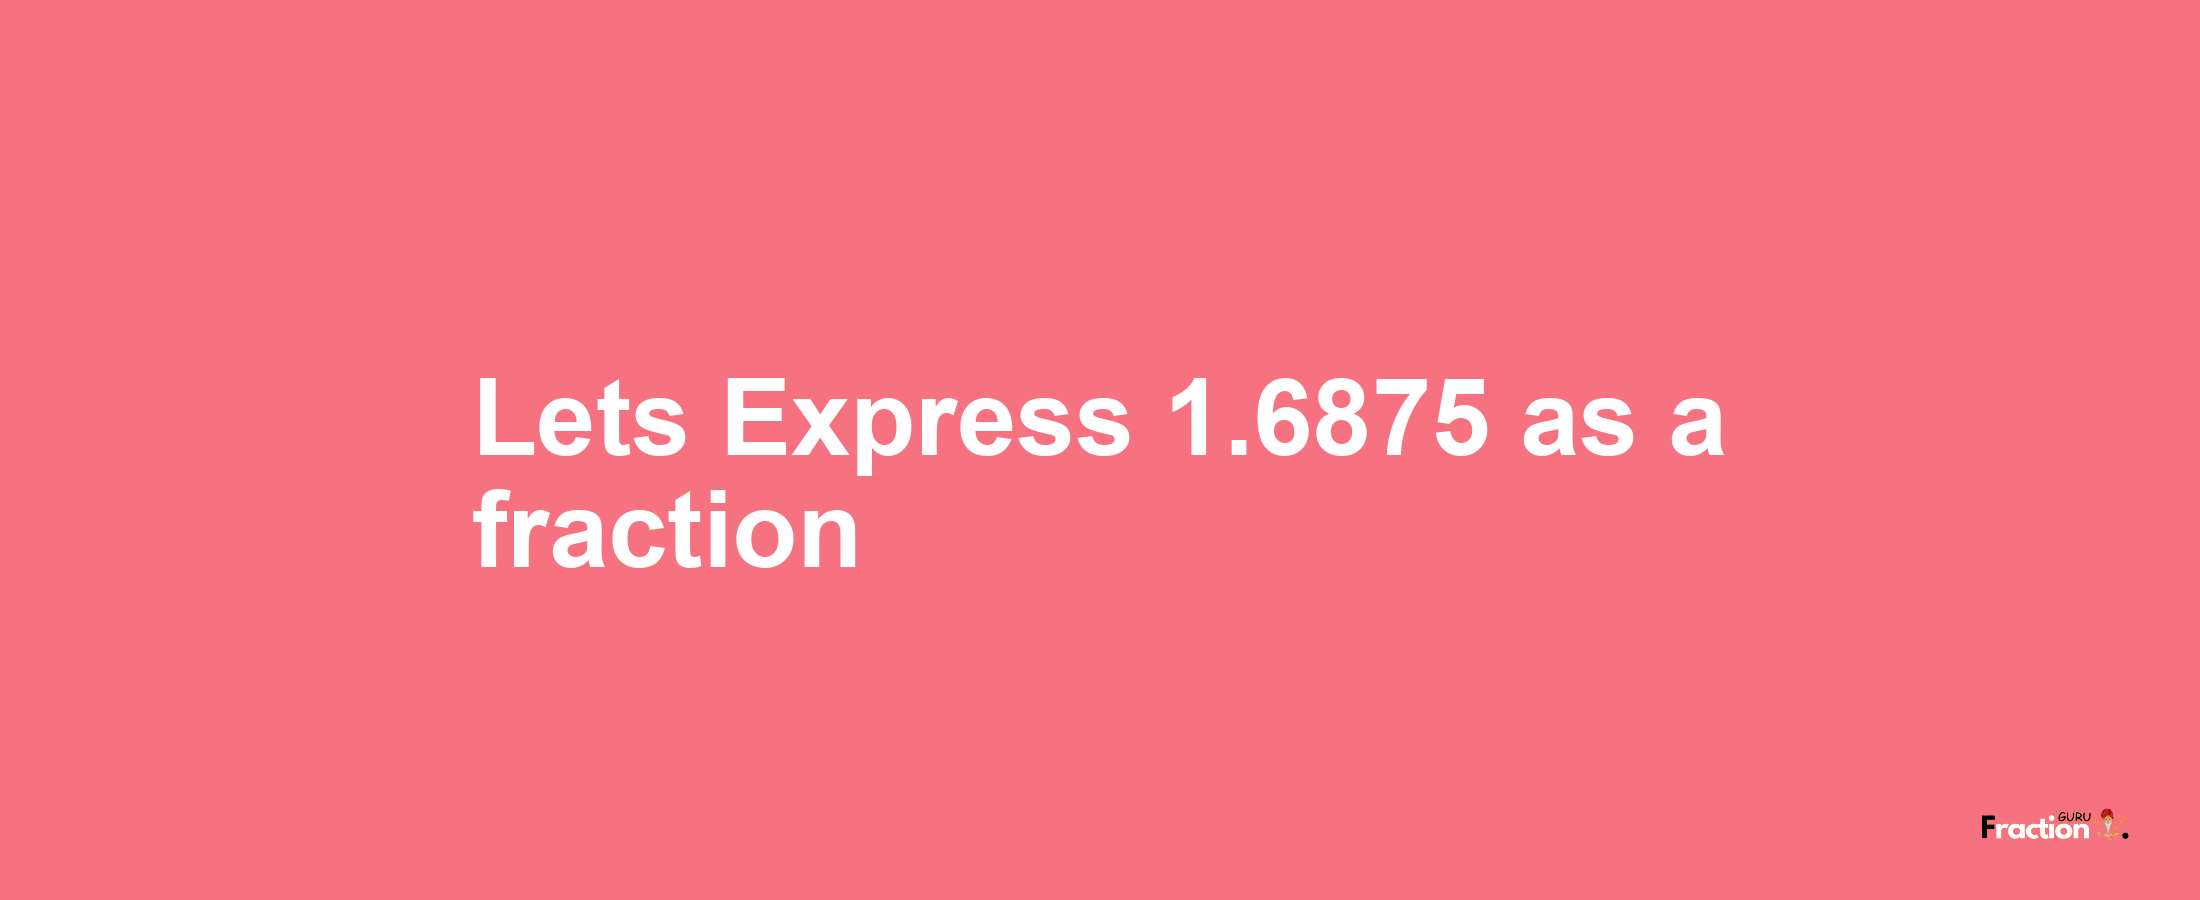 Lets Express 1.6875 as afraction